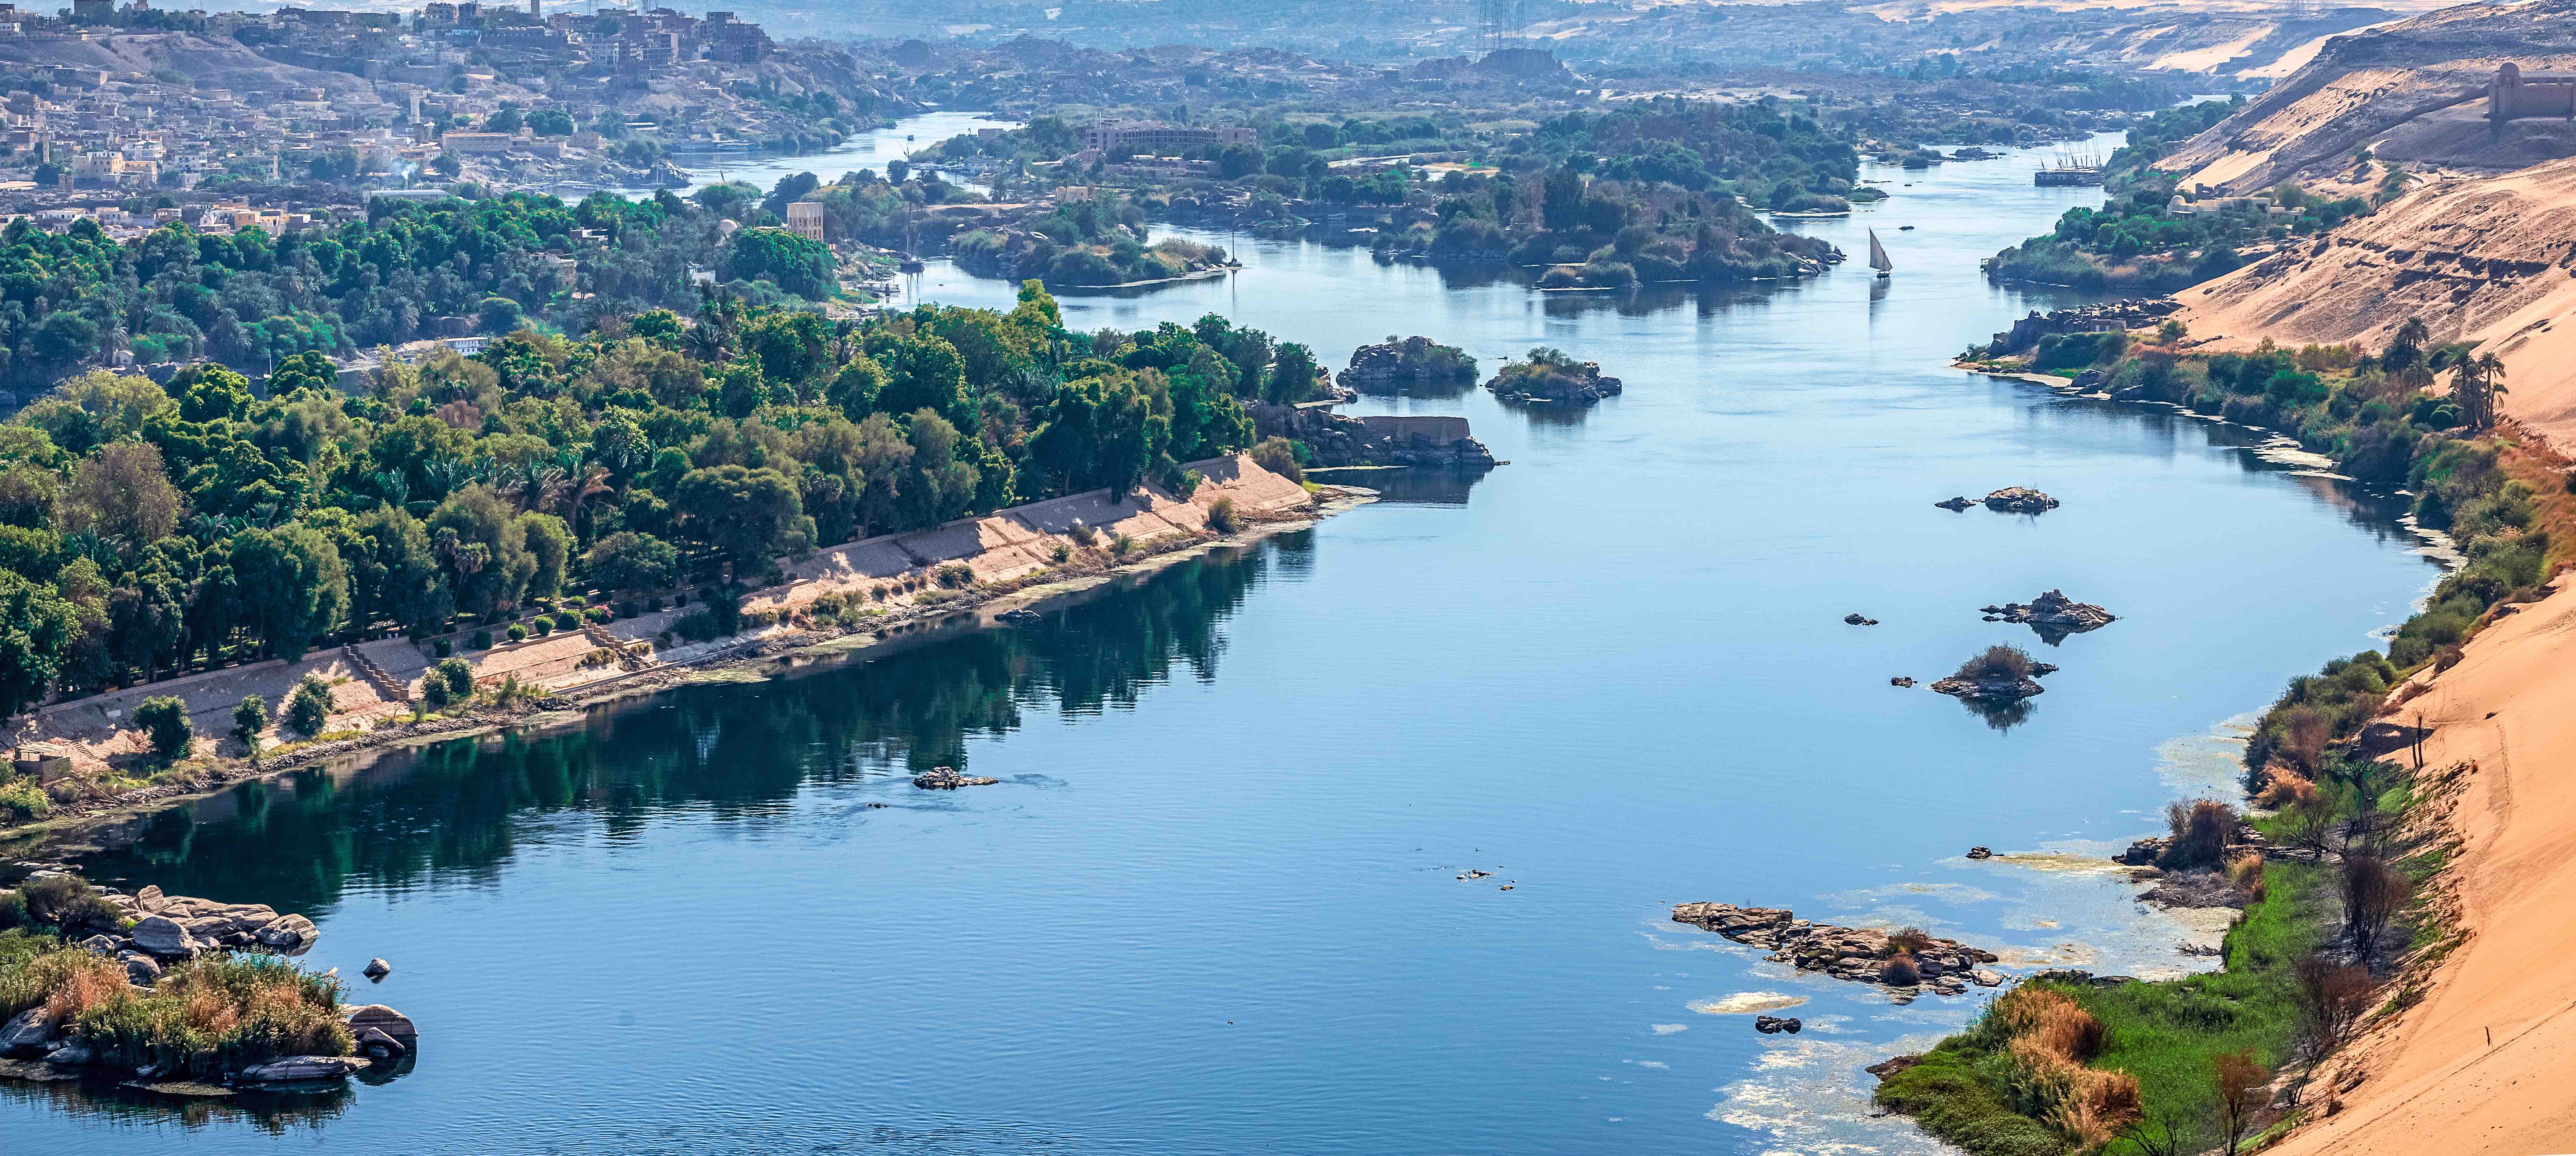 Nile River is 30 Million Years Old, Research Shows